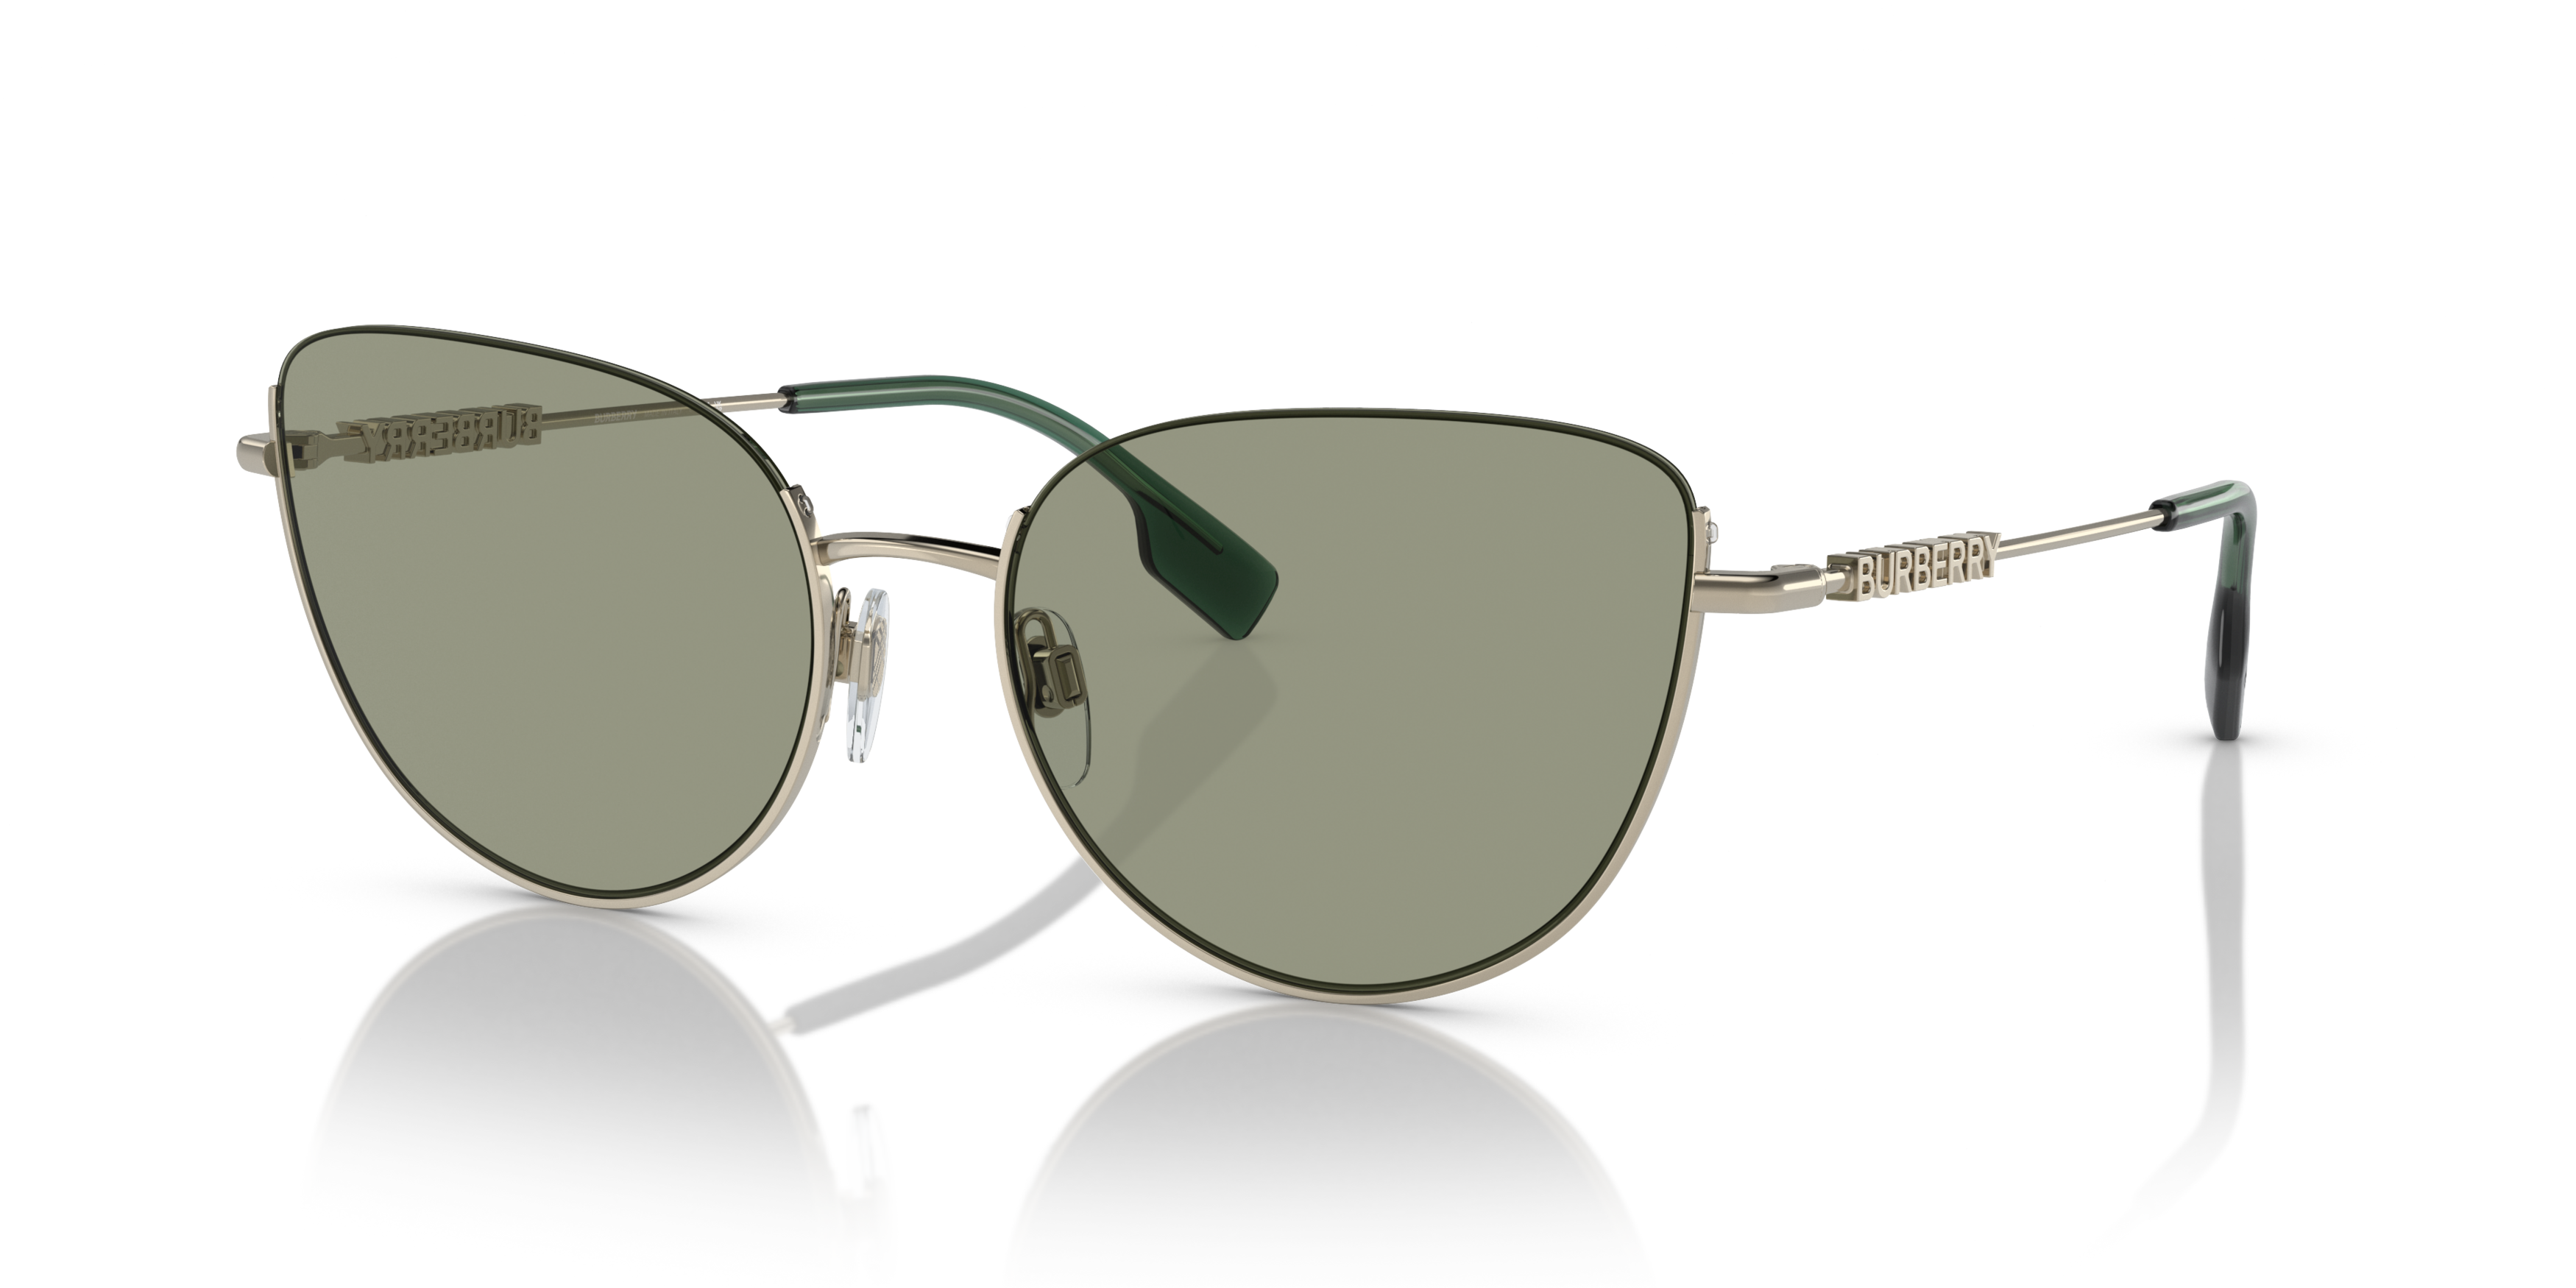 Angle_Left01 Burberry BE 3144 (1109/2) Sunglasses Green / Gold